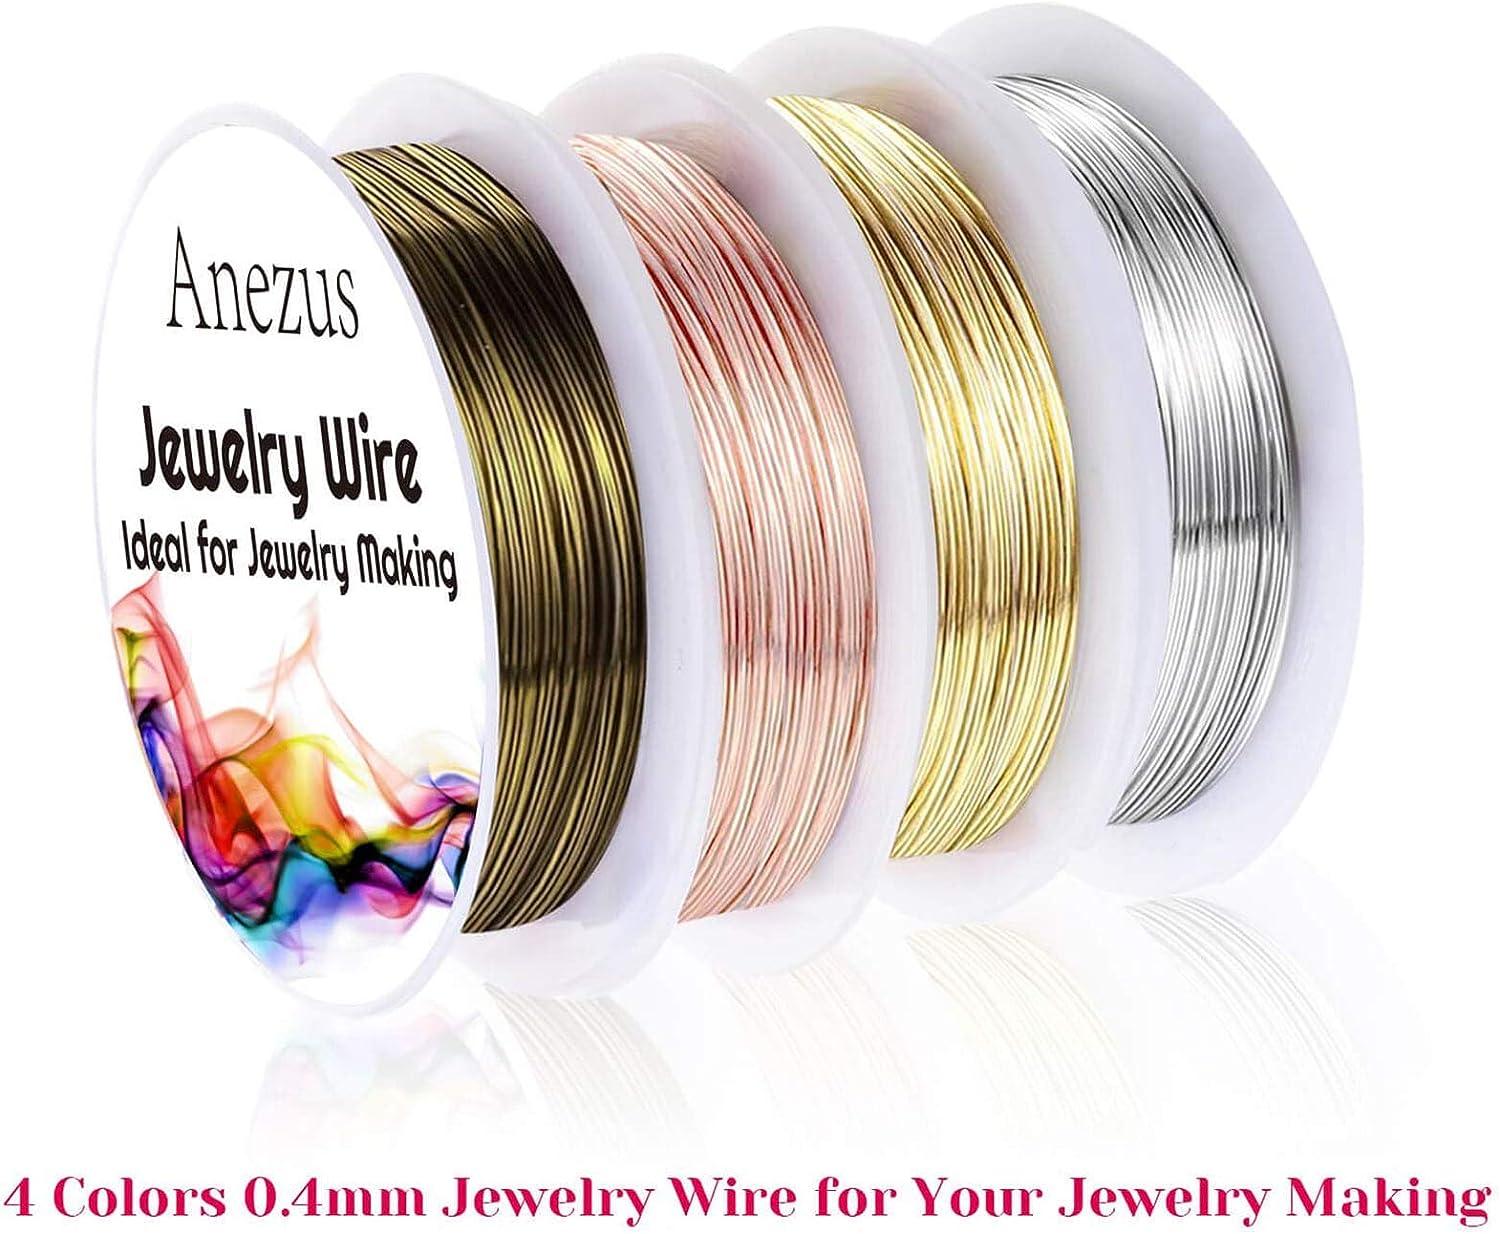 Anezus Jewelry Repair Kit with Jewelry Pliers Jewelry Making Tools